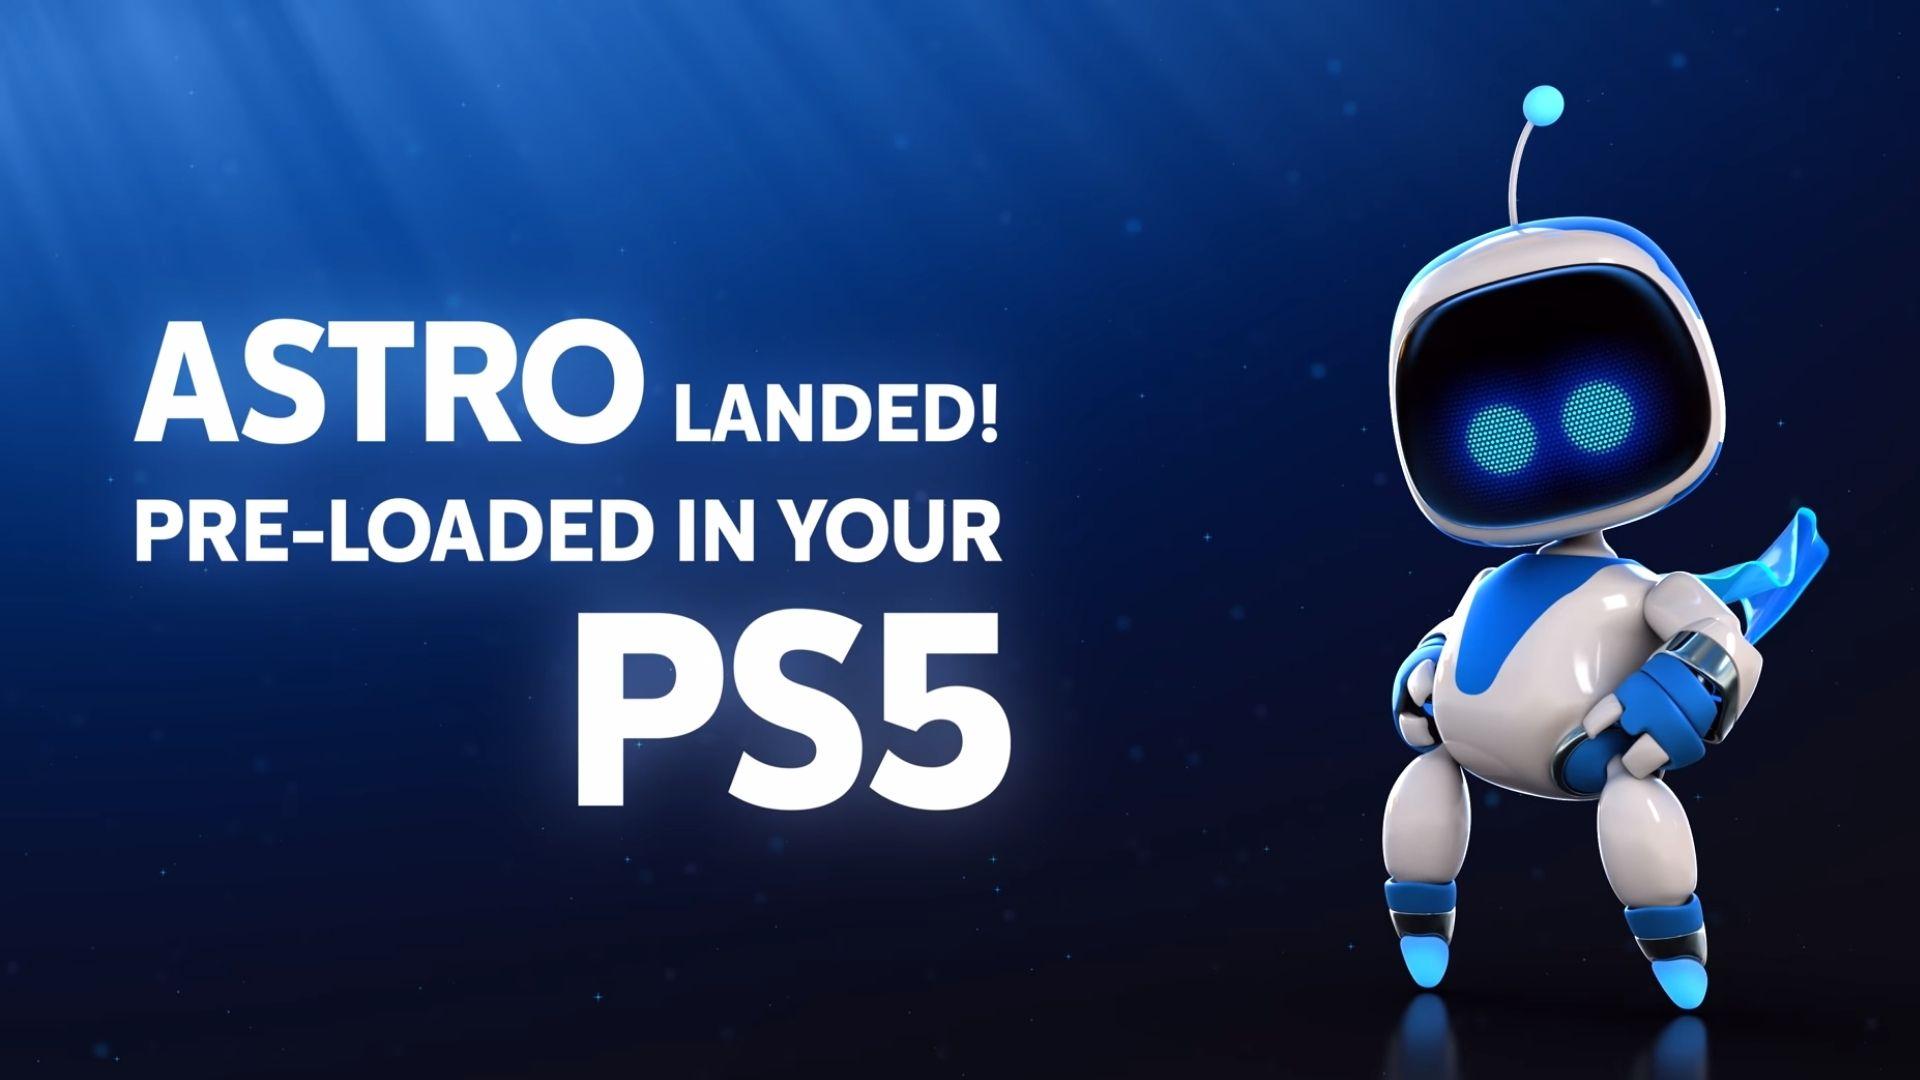 astros playroom comes installed on PS5